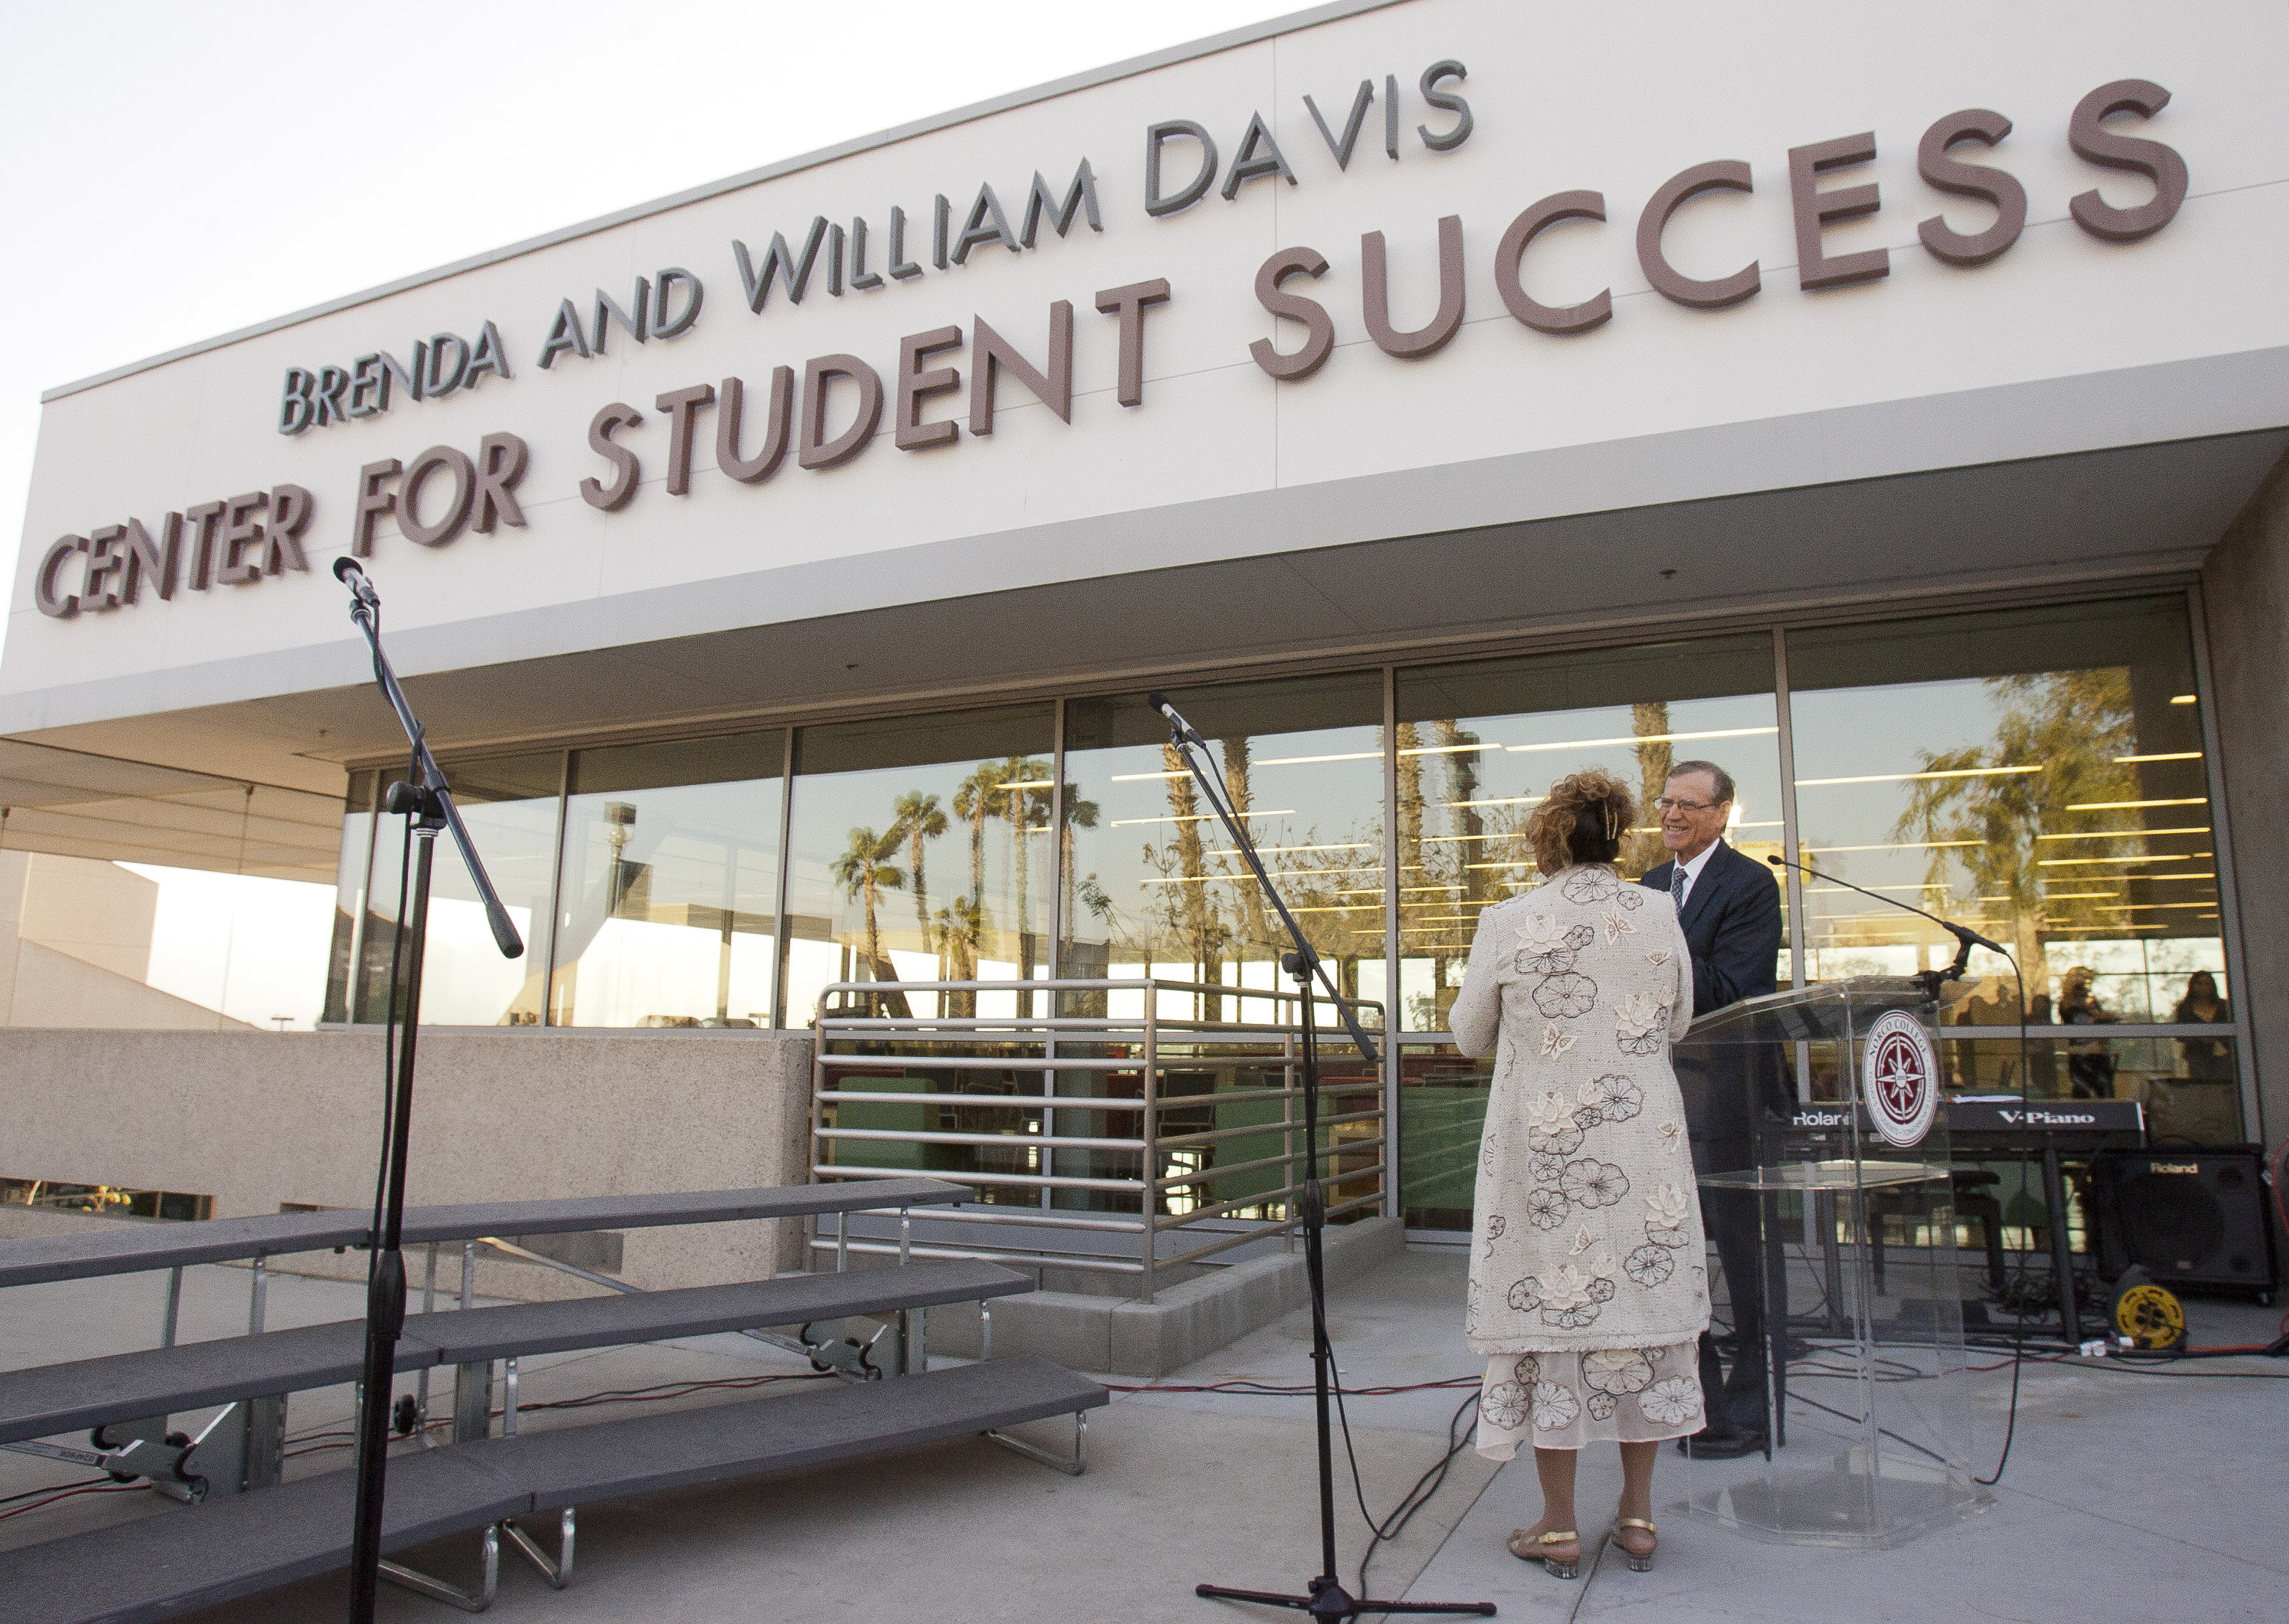 Paul Parnell and Brenda Davis at the Brenda and William Davis Center for Student Success Dedication